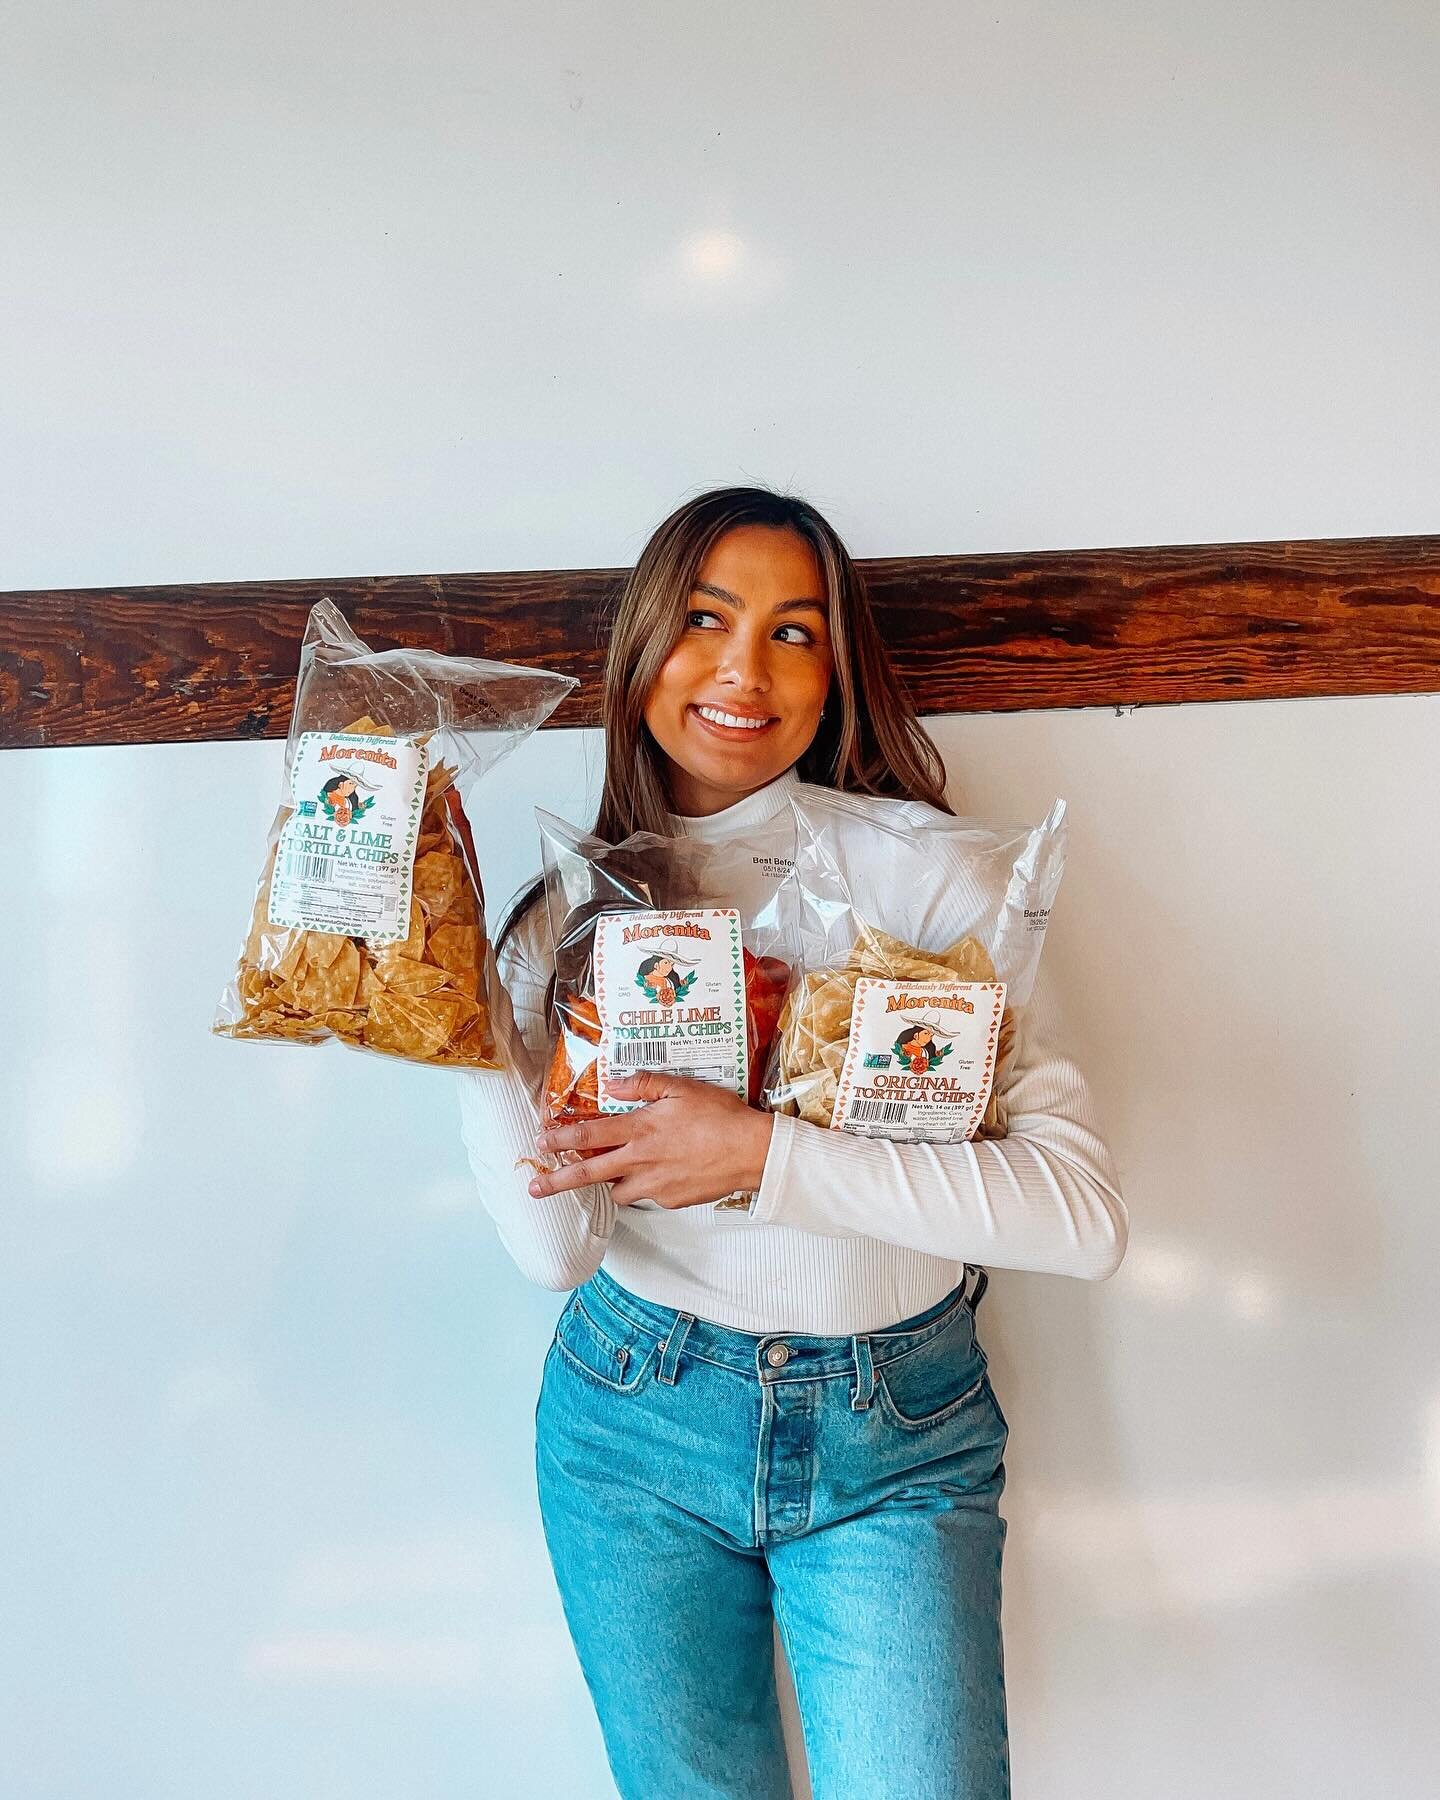 Weekends are for ALL of the chips 🌽⁣
.⁣
.⁣
.⁣
#MorenitaFoods #happyfriday #fridayfeeling #snacks #hungry #friyay #chipsandsalsa #tortillachips #foodies #bayarea #tgif